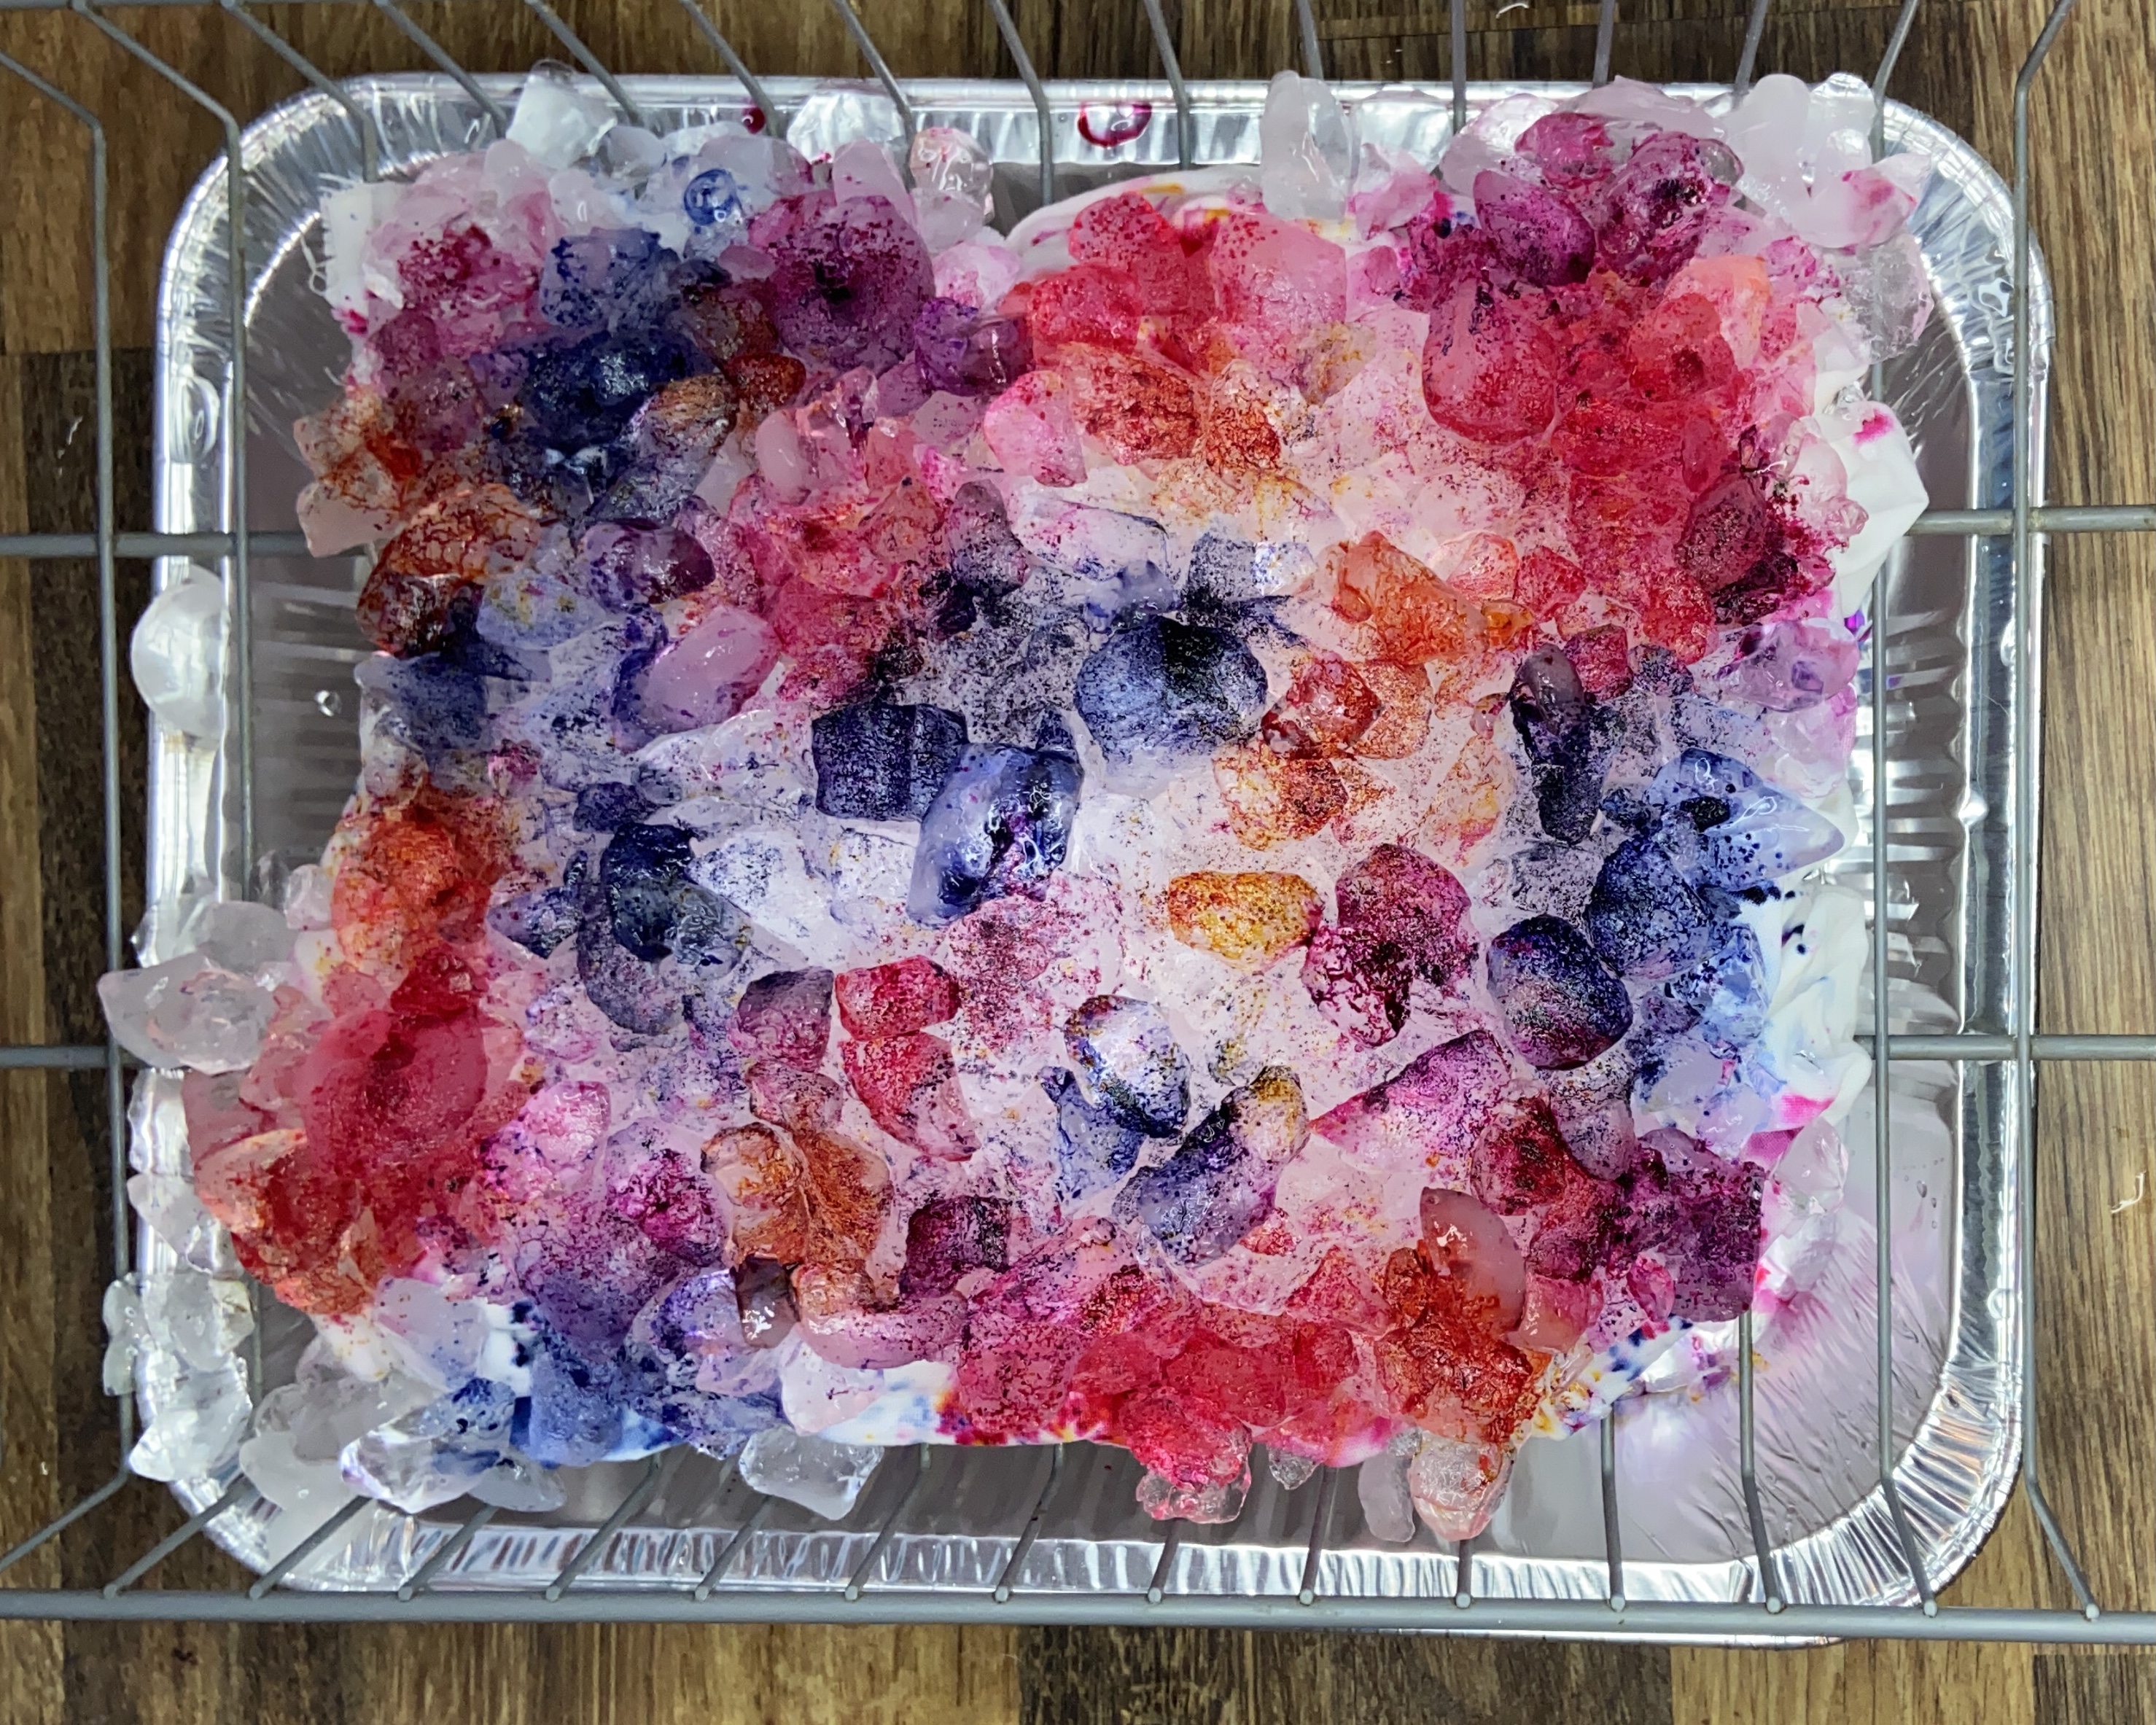 How to Ice Tie Dye: Easy Tutorial for Ice Dyeing Fabric - Threads